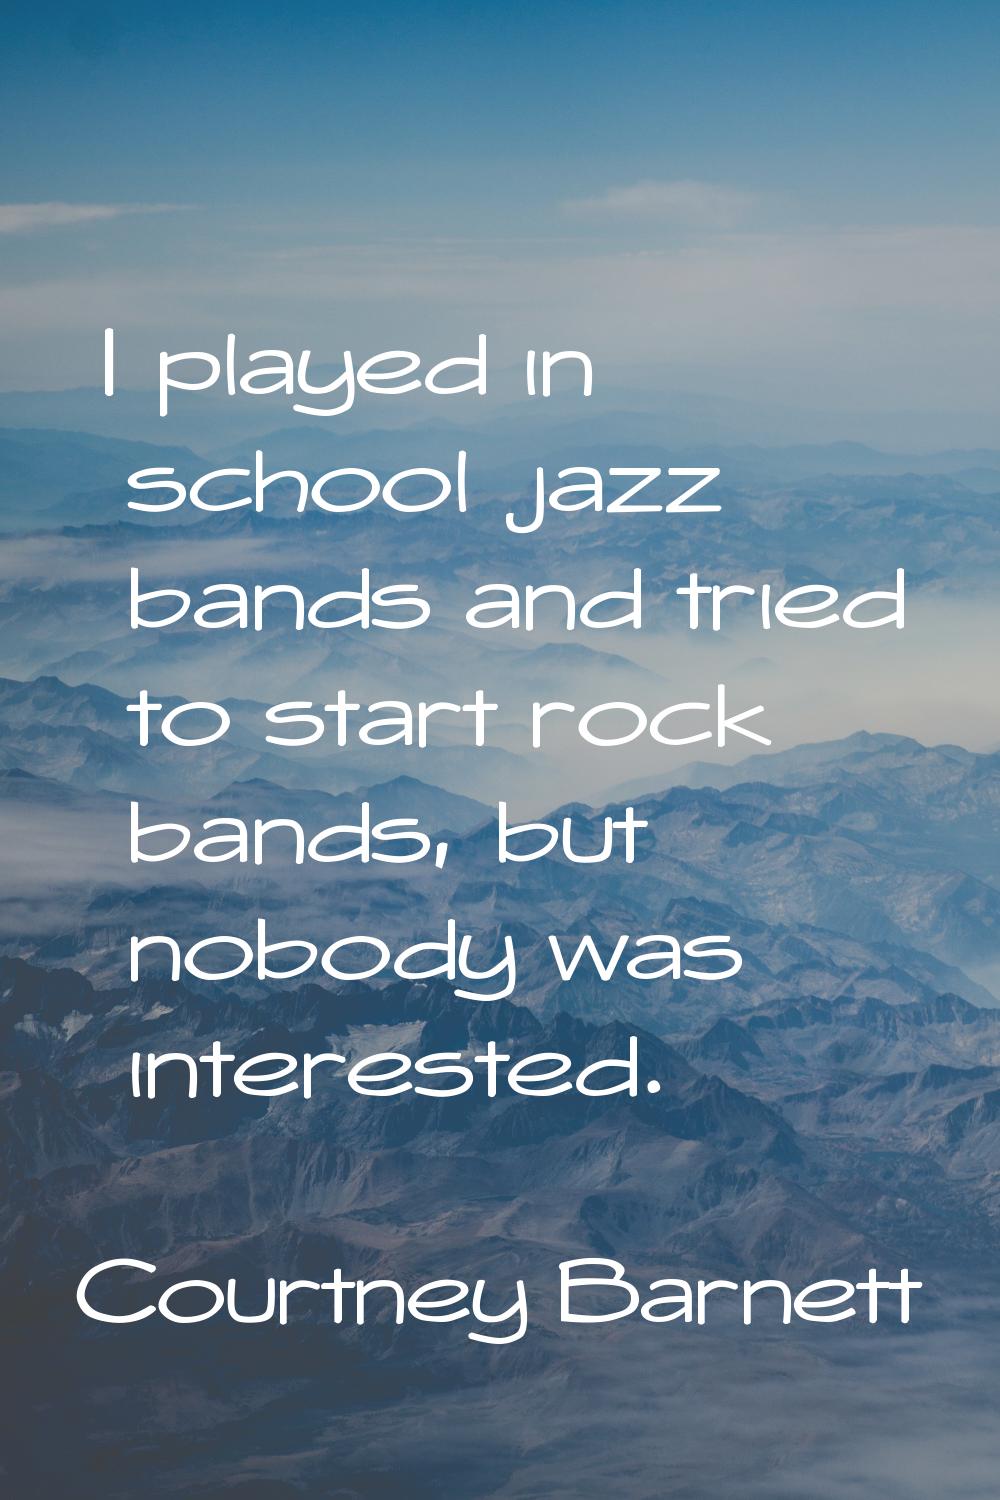 I played in school jazz bands and tried to start rock bands, but nobody was interested.